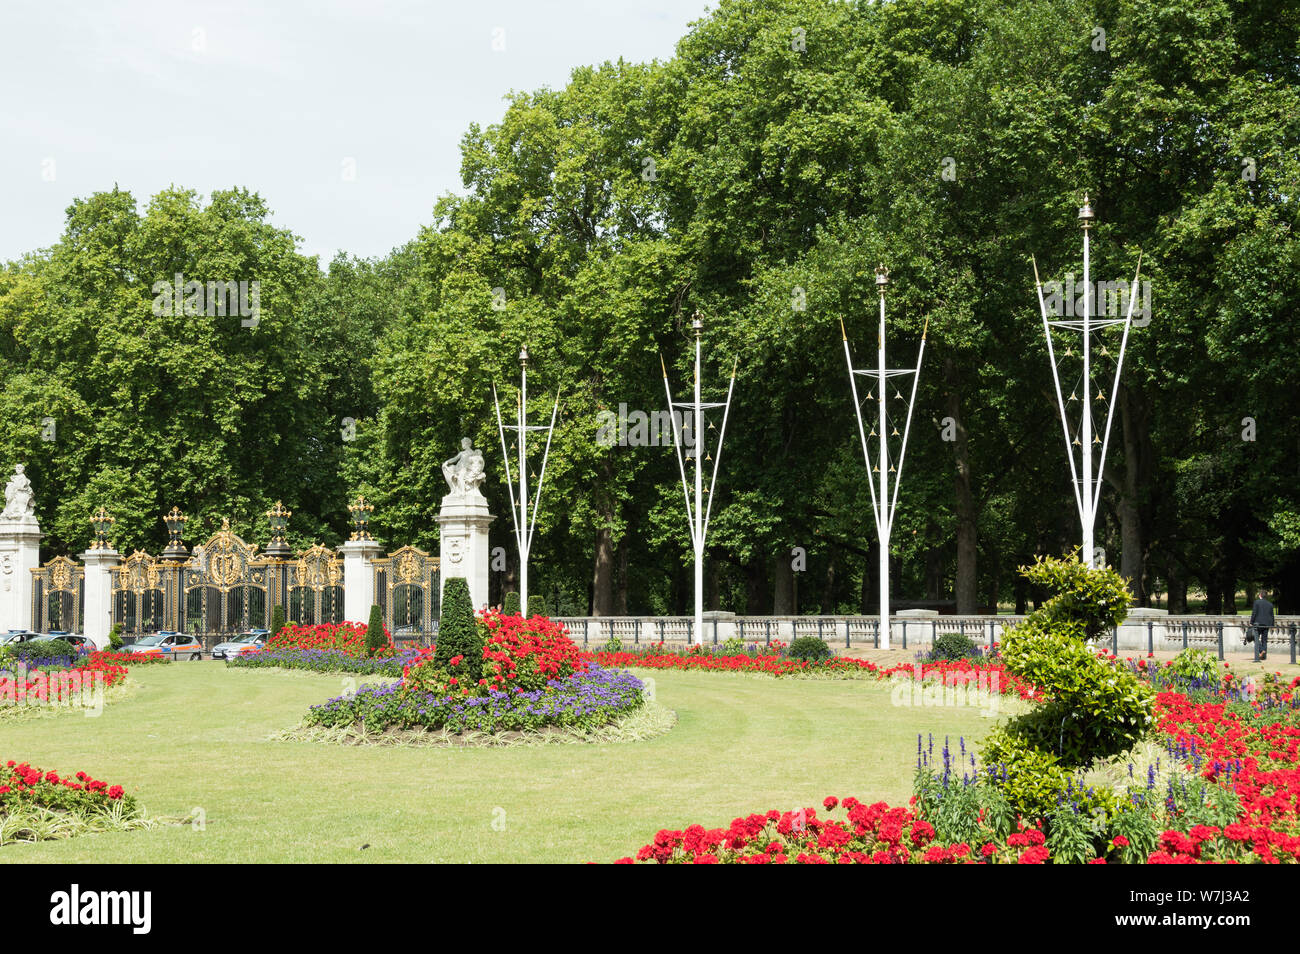 Landscape view of grass and gardens full of flowers near Buckingham palace and gates on a sunny day.  Tourists and policeman nearby Stock Photo